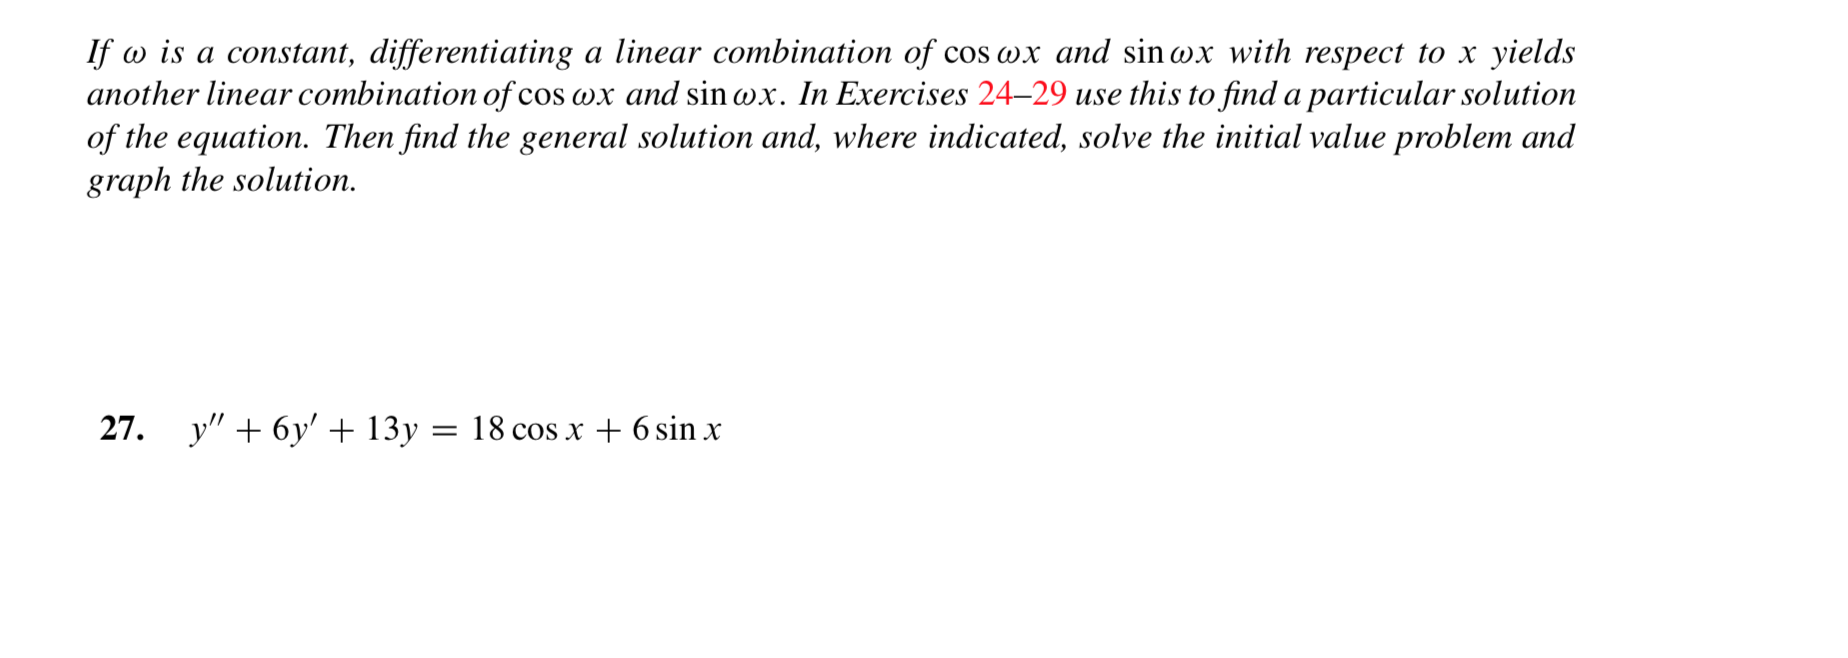 If o is a constant, differentiating a linear combination of
another linear combination of cos wx and sin wx. In Exercises 24-29 use this to find a particular solution
of the equation. Then find the general solution and, where indicated, solve the initial value problem and
graph the solution
cos wx and sinwx with respect to x
yields
y" 6y' + 13y = 18 cos x + 6 sin x
27.
